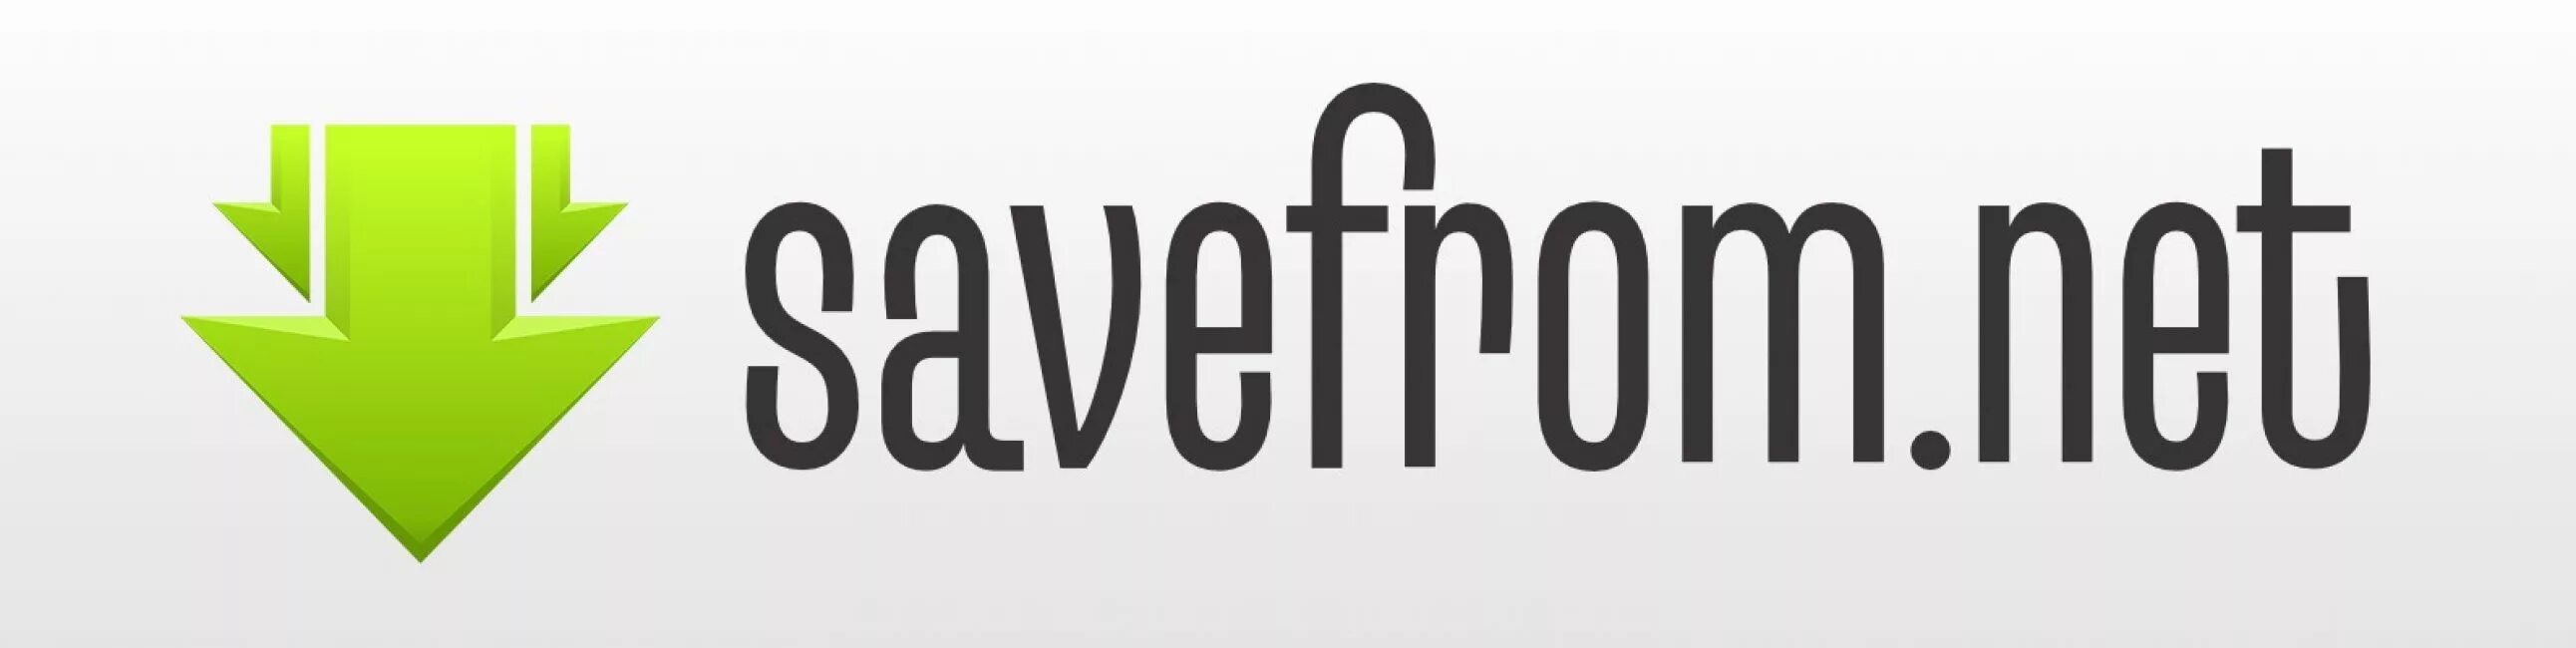 Https savefrom net 240. Savefrom. Savefrom.net иконка. Savefrom логотип. Safe from.